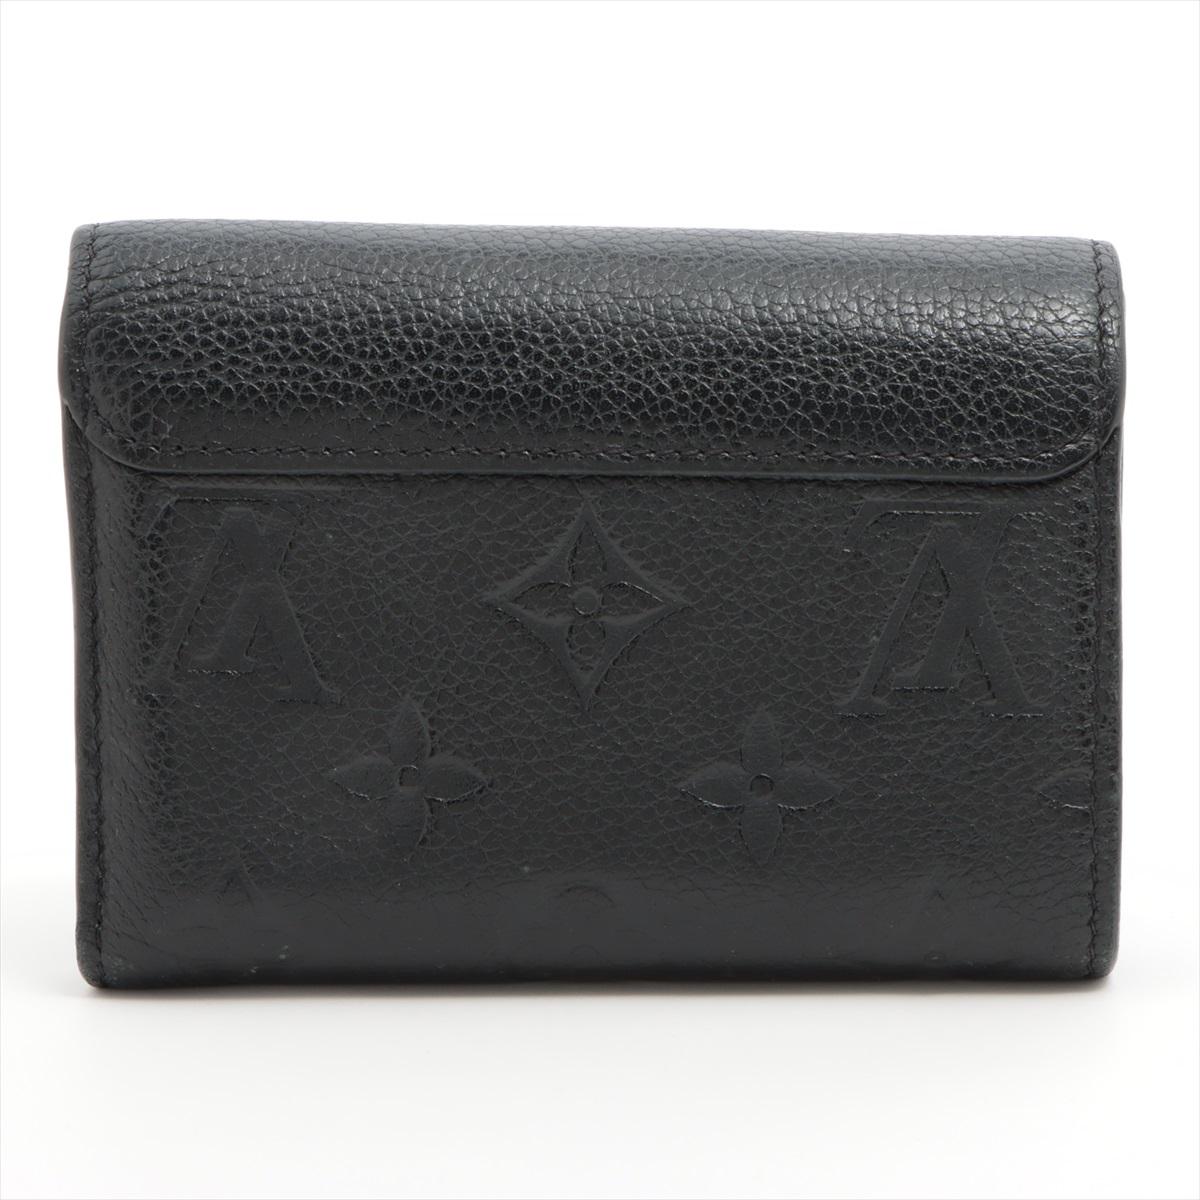 Louis Vuitton Monogram Empreinte Pont Neuf Trifold Wallet Black In Good Condition For Sale In Indianapolis, IN